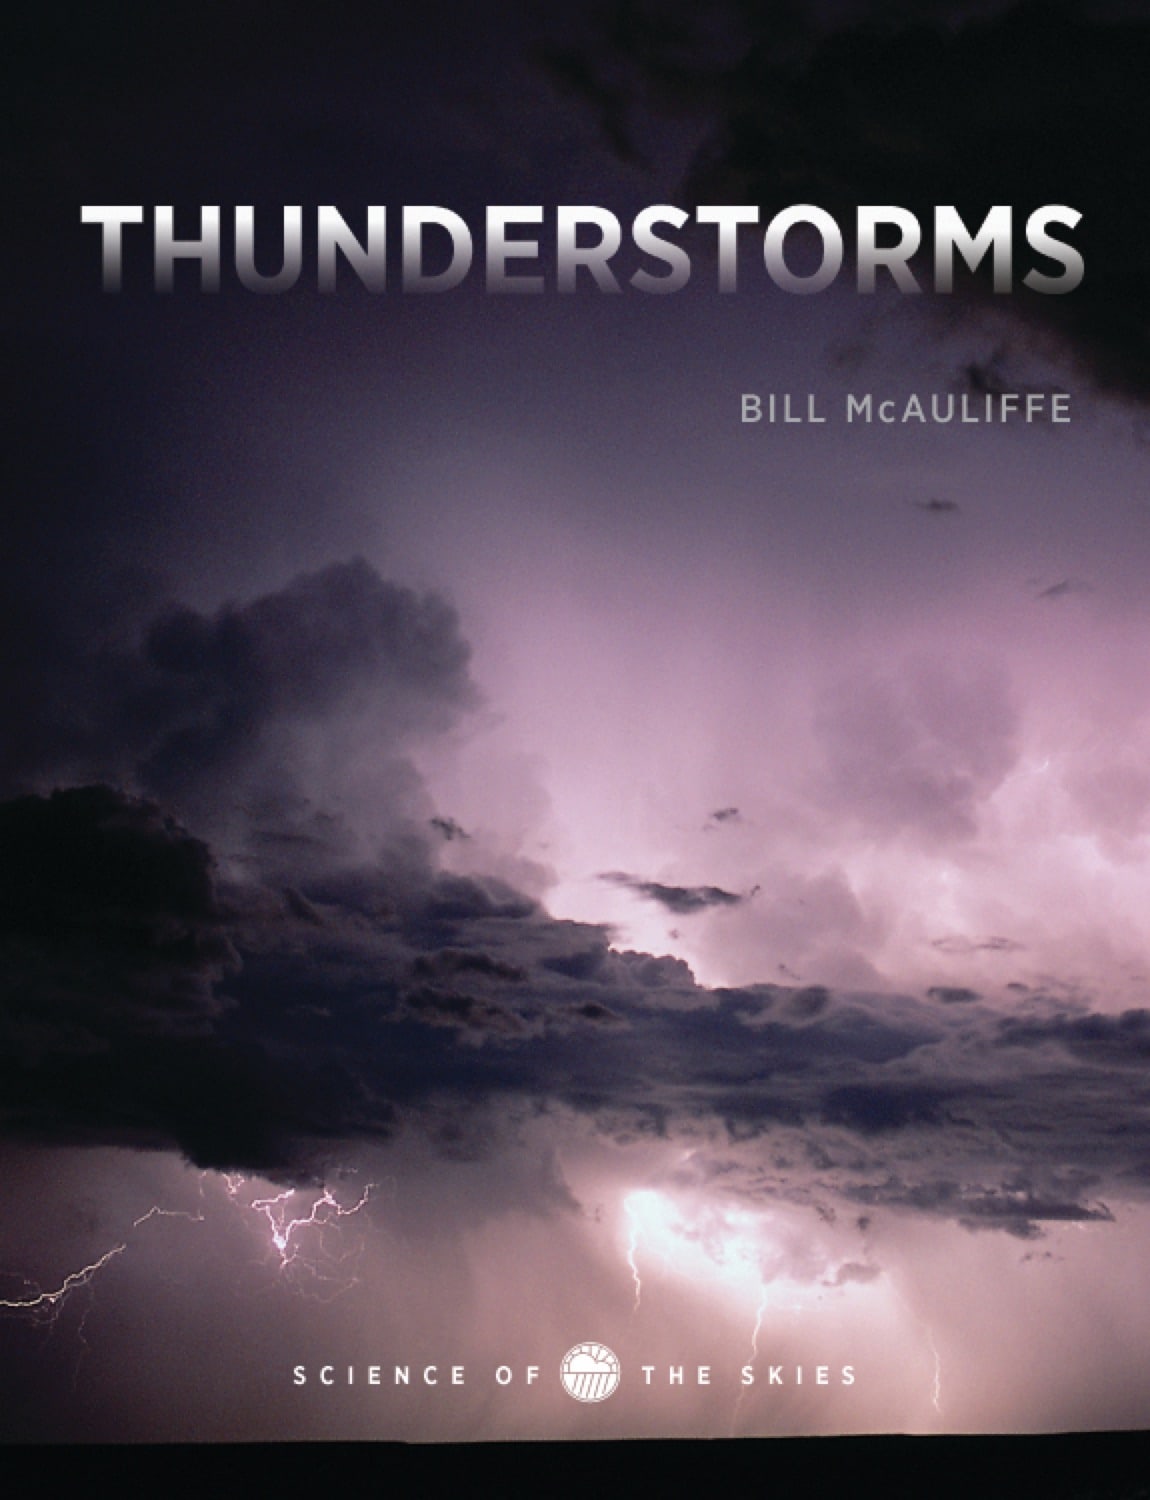 Science of the Skies: Thunderstorms